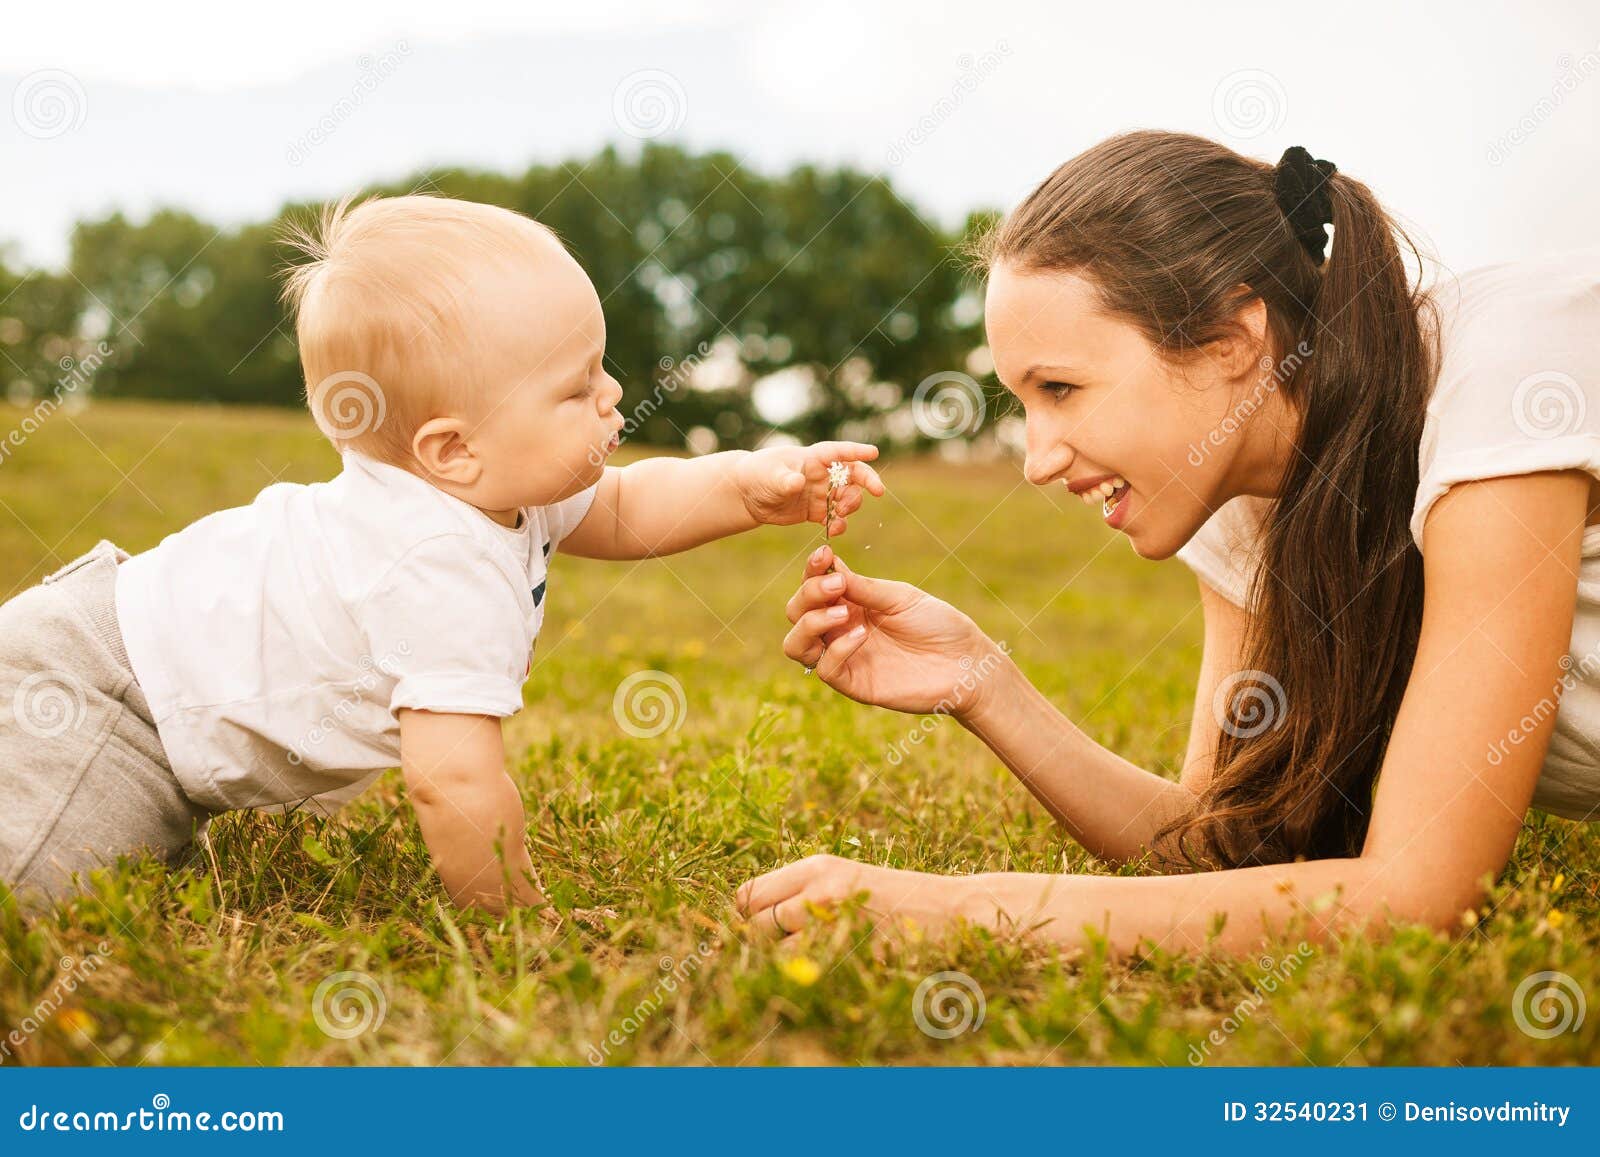 Beautiful Young Mother Giving Flower To Her Baby Stock Image - Image green: 32540231